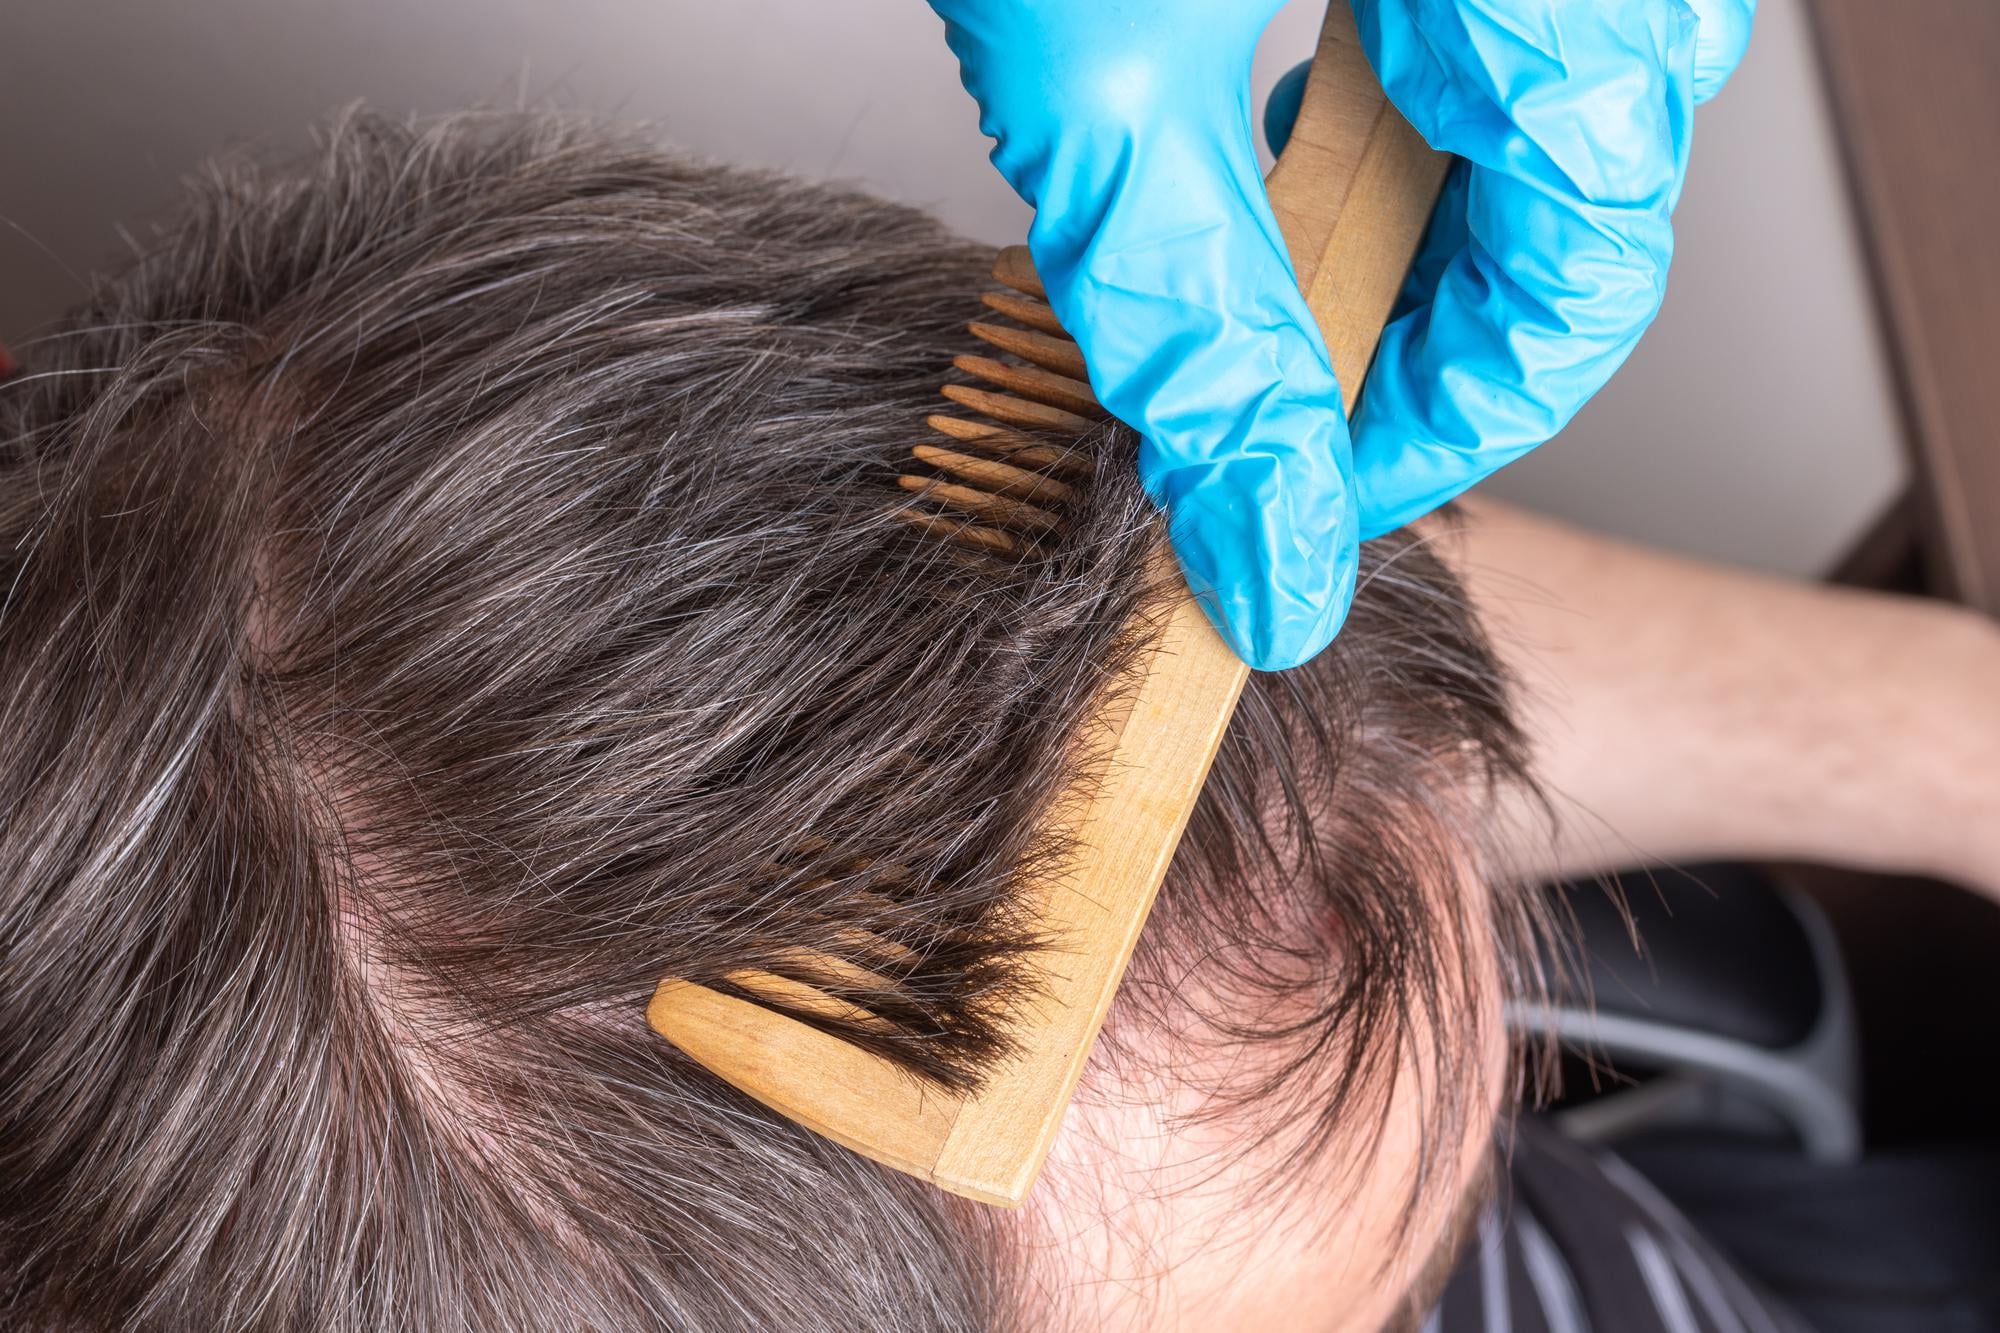 medical hair loss treatment for men and women